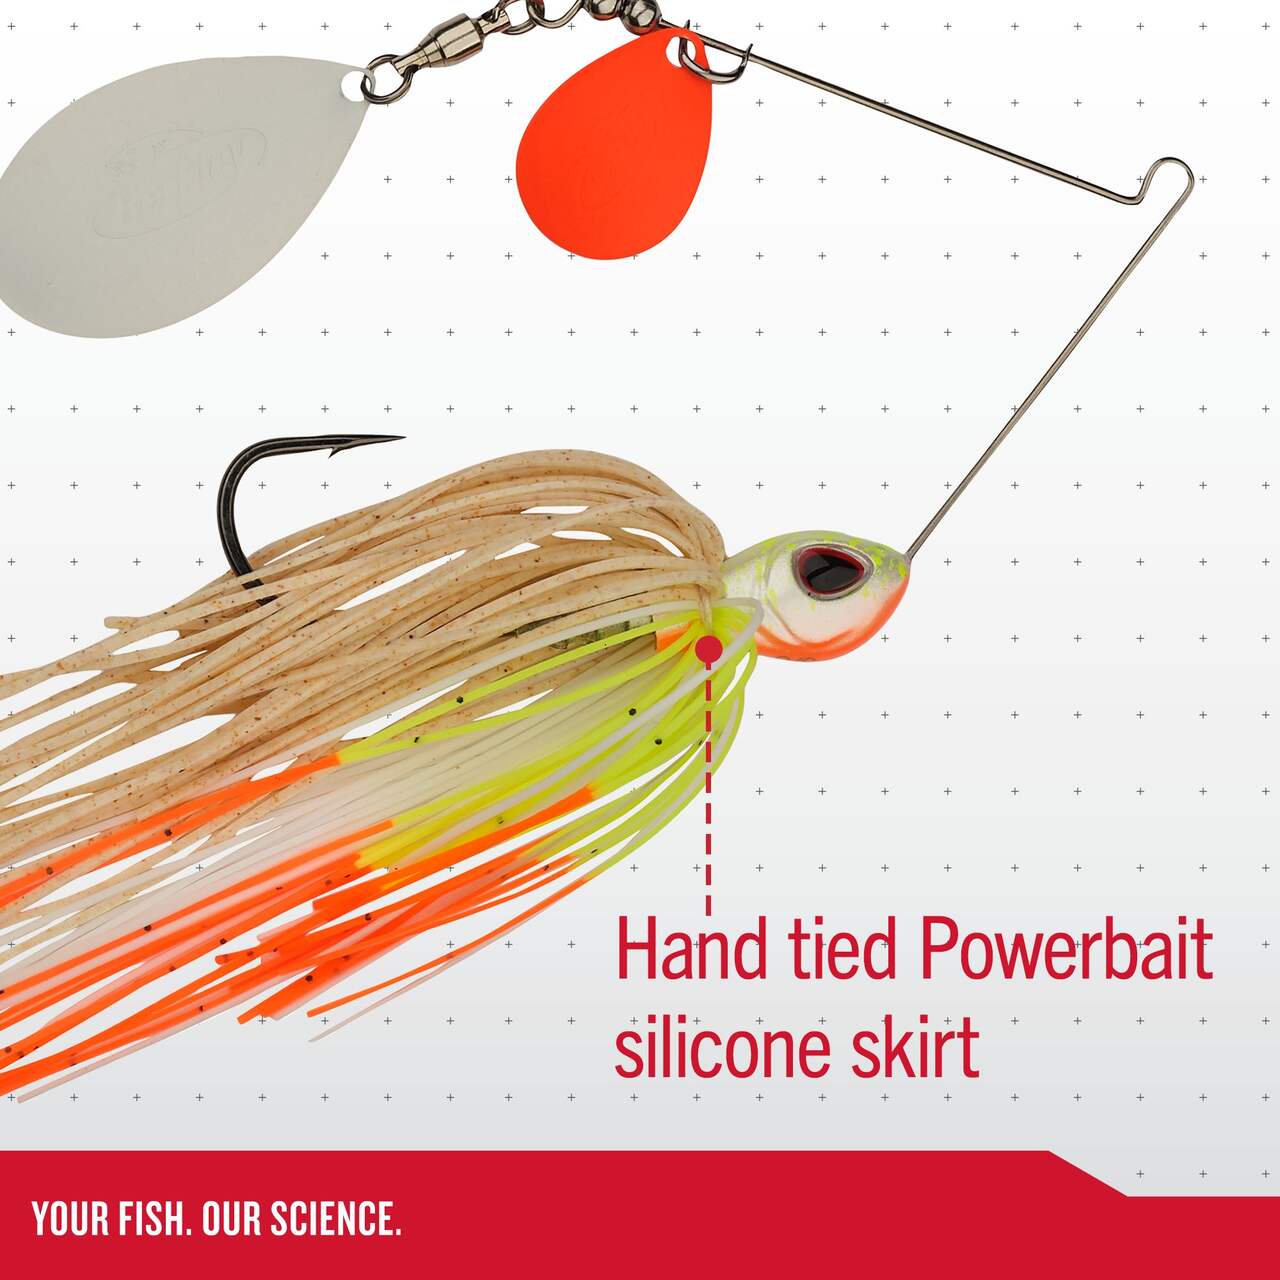 https://media-www.canadiantire.ca/product/playing/fishing/fishing-lures/1785733/berkley-power-blade-compact-1-2-oz-crypto-gold-gold-eeed2fee-9419-4ea4-8a58-543515c960e9-jpgrendition.jpg?imdensity=1&imwidth=1244&impolicy=mZoom